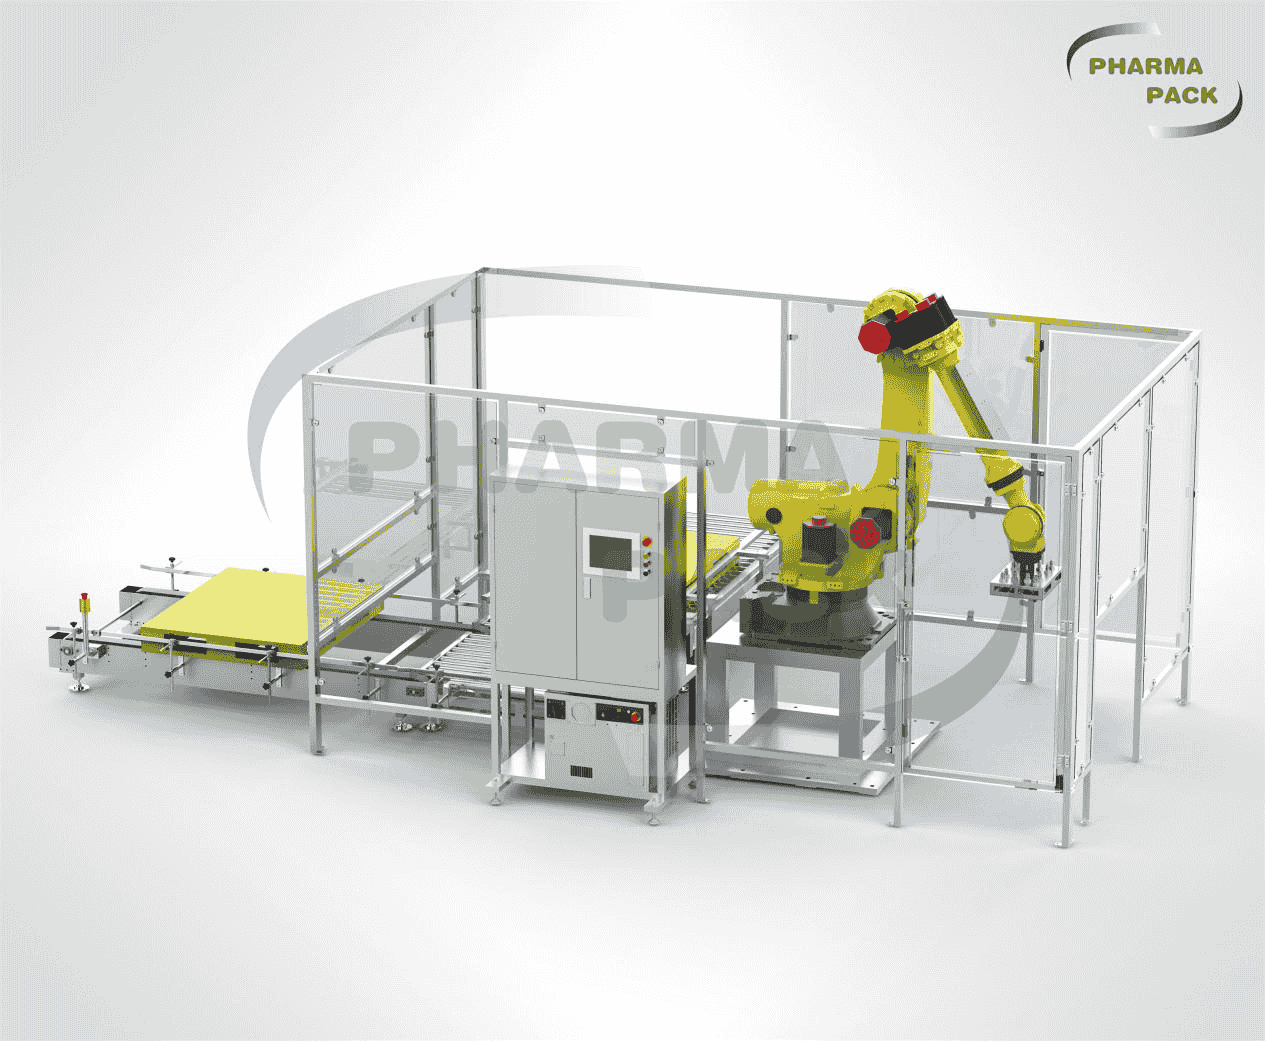 An automatic palletizer: a tool to improve the efficiency of industrial production